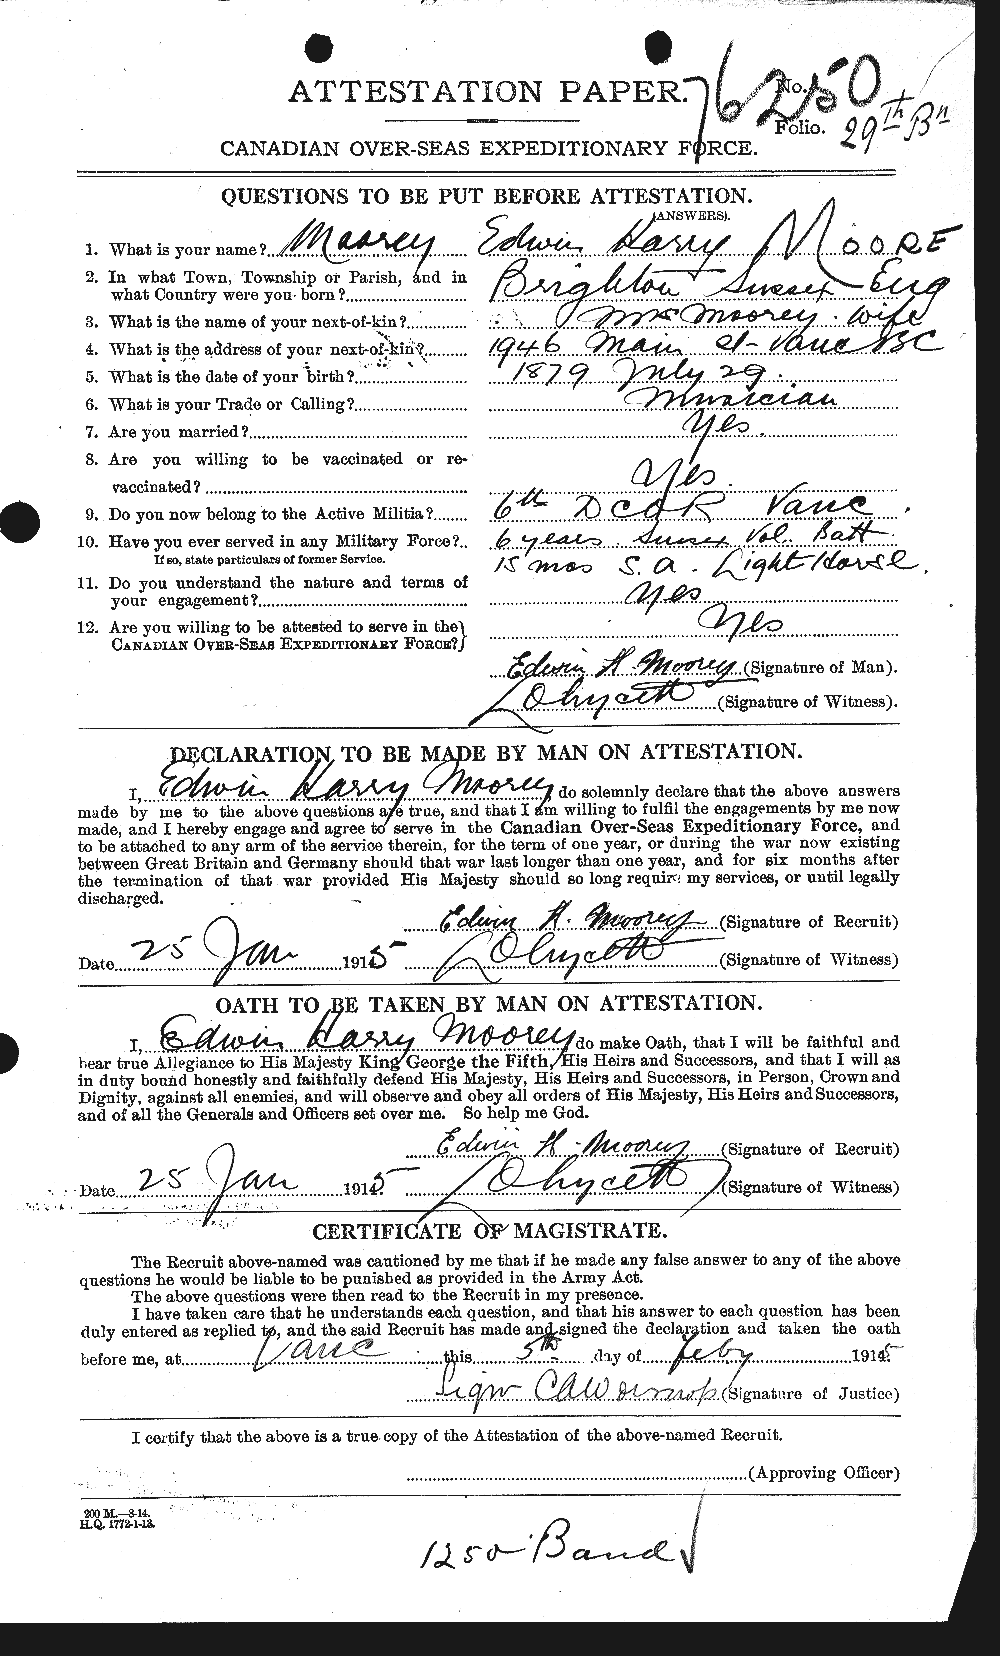 Personnel Records of the First World War - CEF 506644a